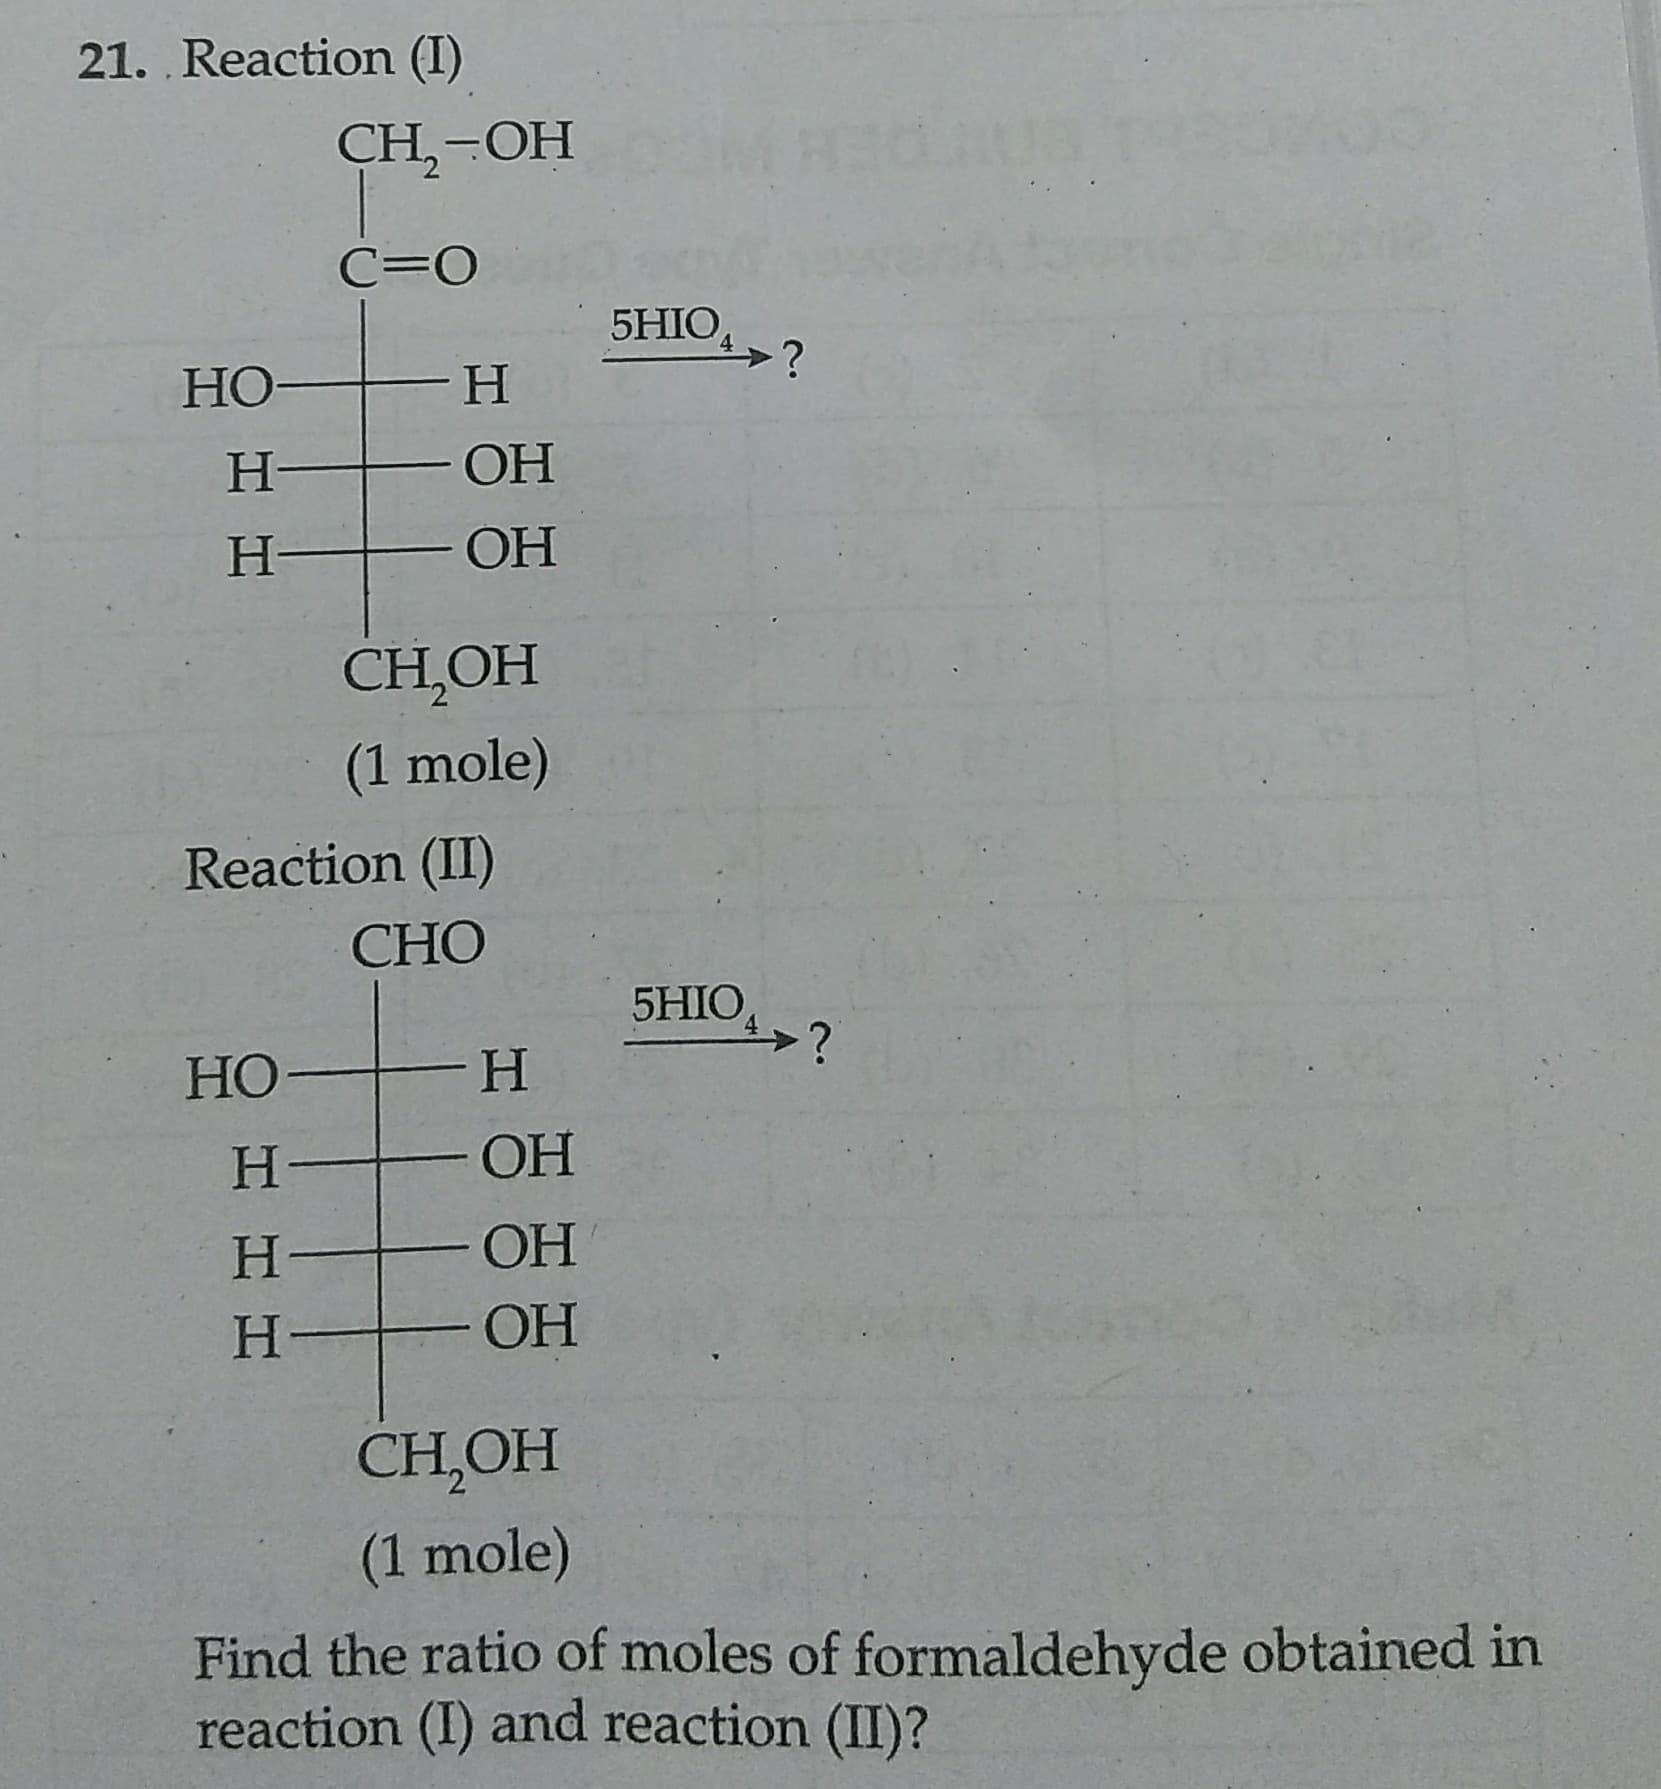 21. Reaction (I)
CH,-OH
C=0
5HIO
4.
HO
H.
H.
H.
ОН
CH,OH
(1 mole)
Reaction (II)
CHO
5HIO,
HO
H.
H.
OH
H.
ОН
H.
ОН
CH,OH
(1 mole)
Find the ratio of moles of formaldehyde obtained in
reaction (I) and reaction (II)?
